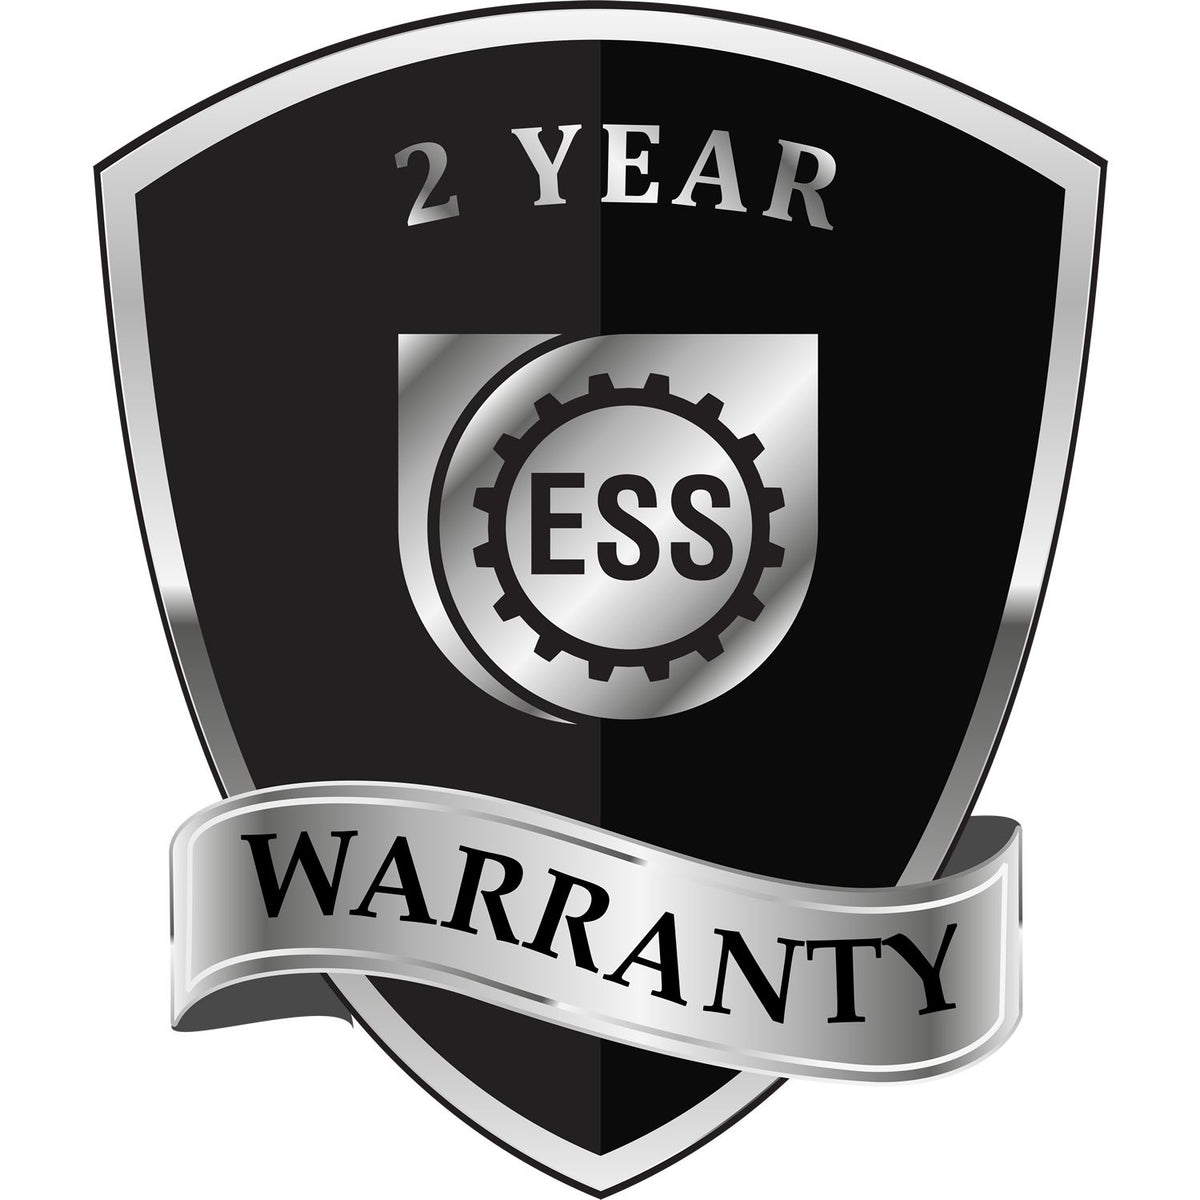 A black and silver badge or emblem showing warranty information for the Gift Louisiana Geologist Seal